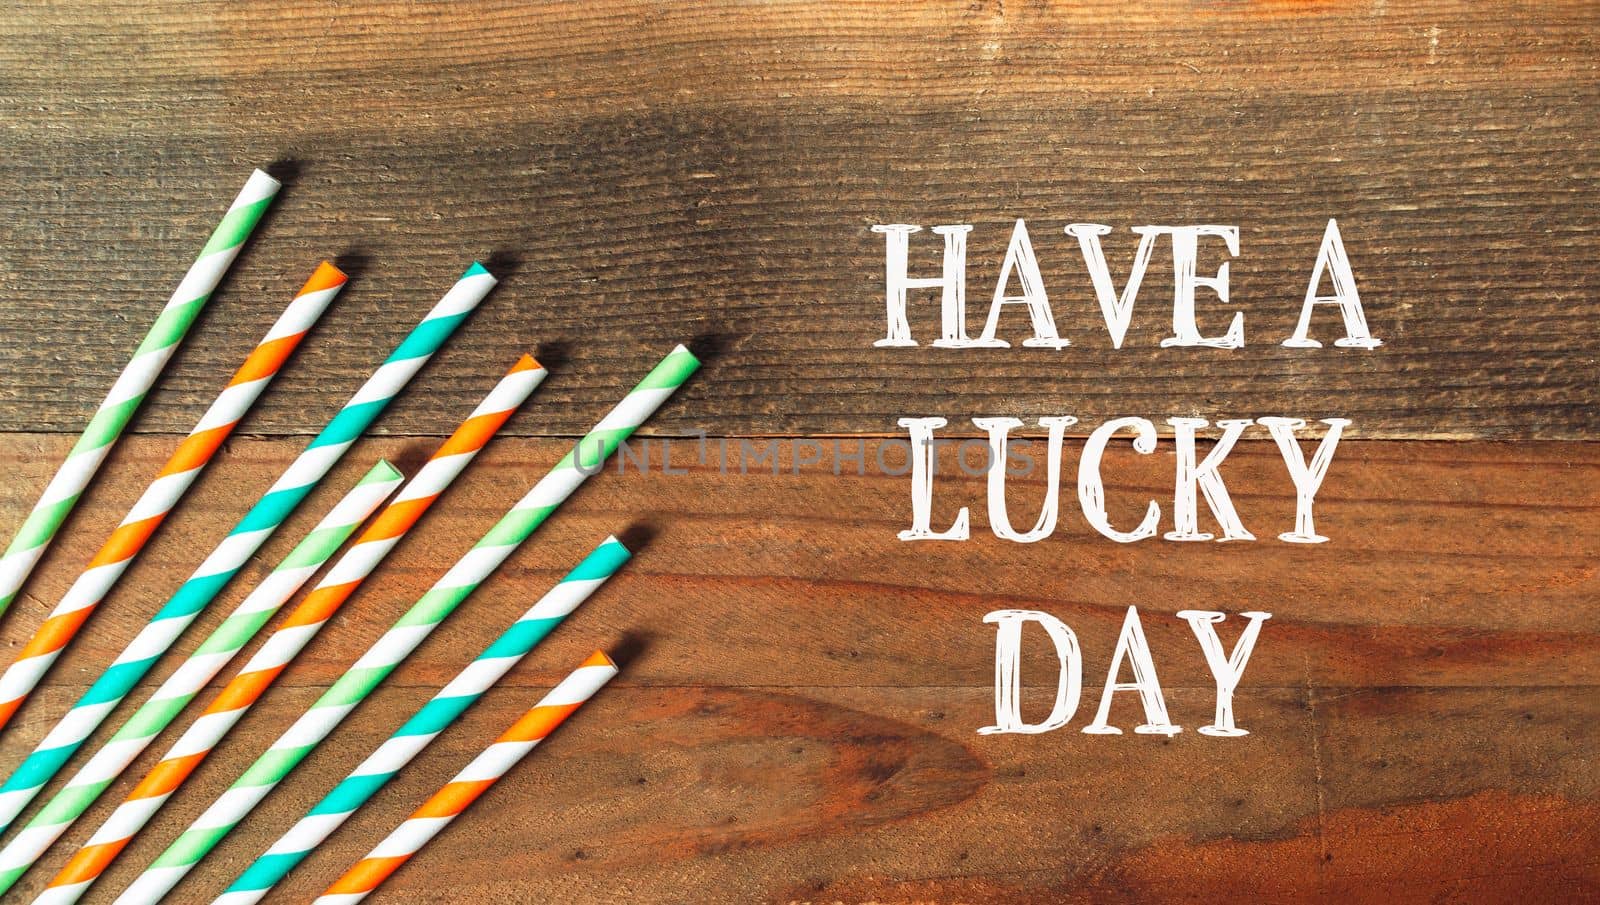 Have A Lucky Day on a wooden background by Alla_Morozova93